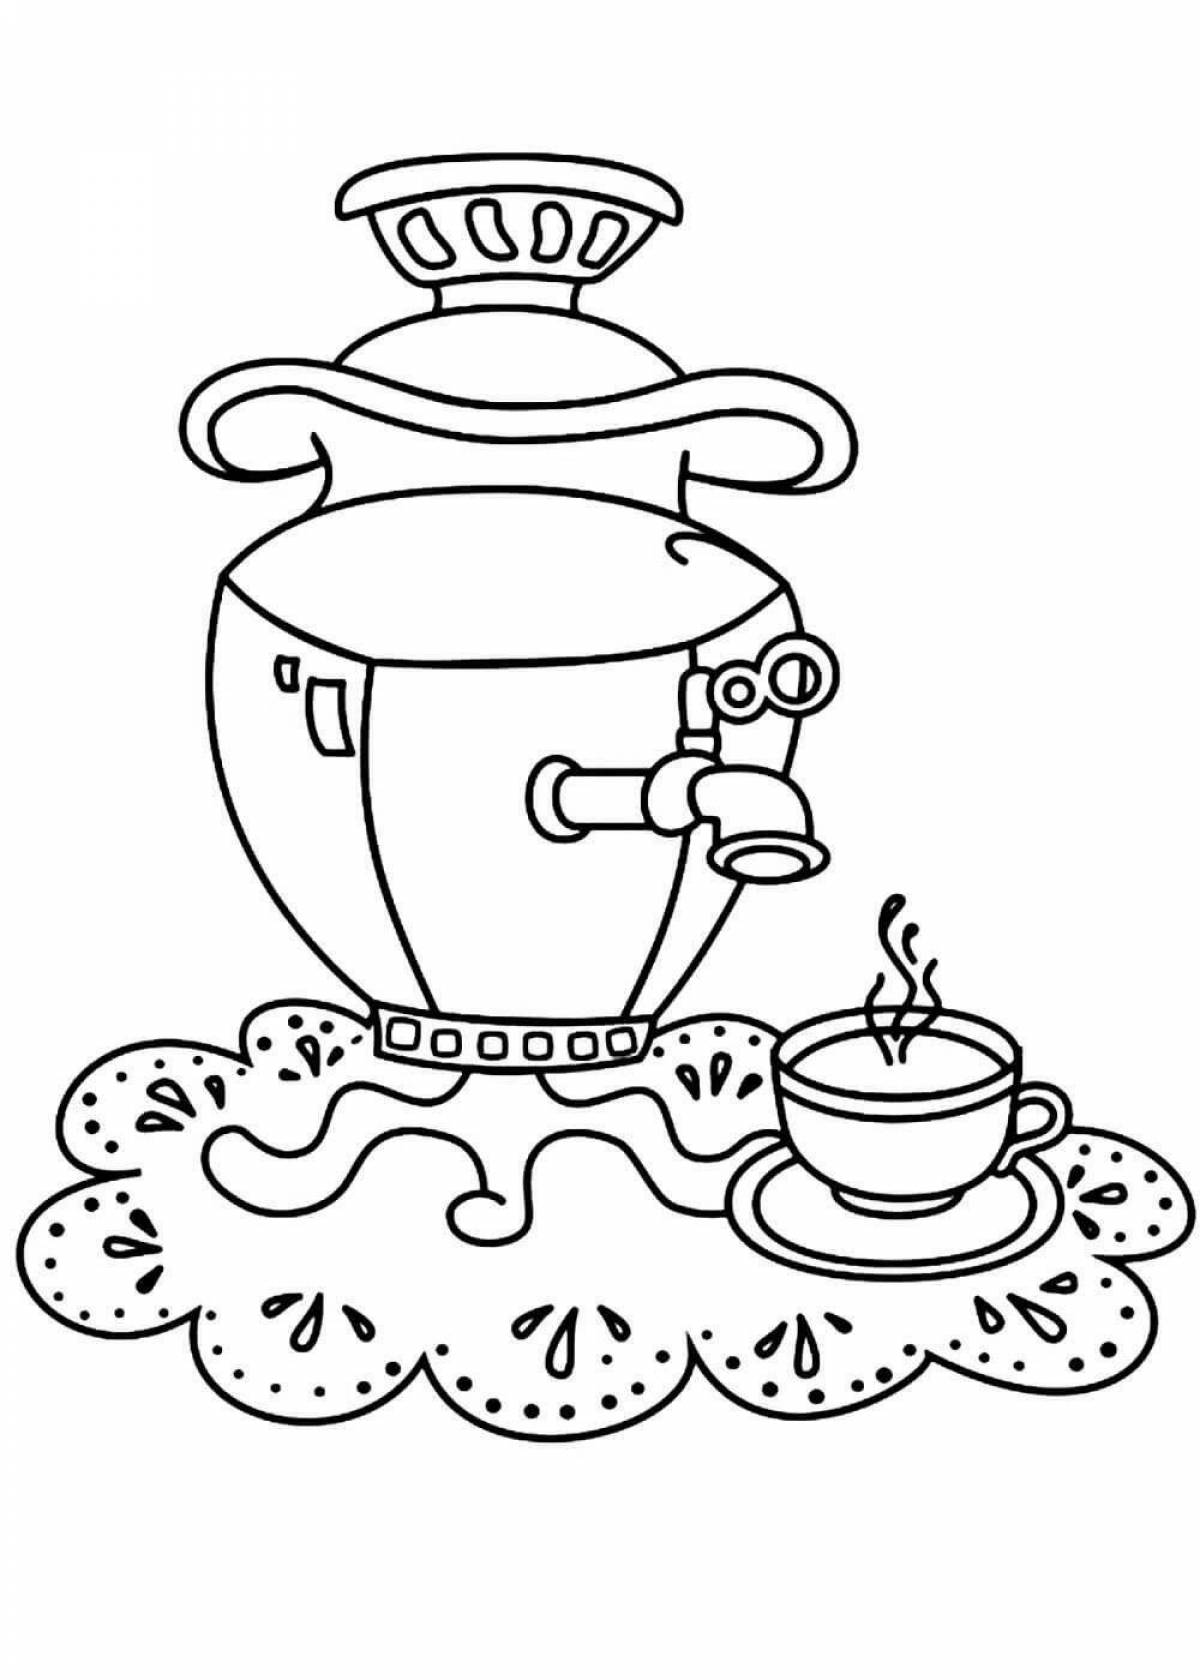 Coloring samovar for children 6-7 years old